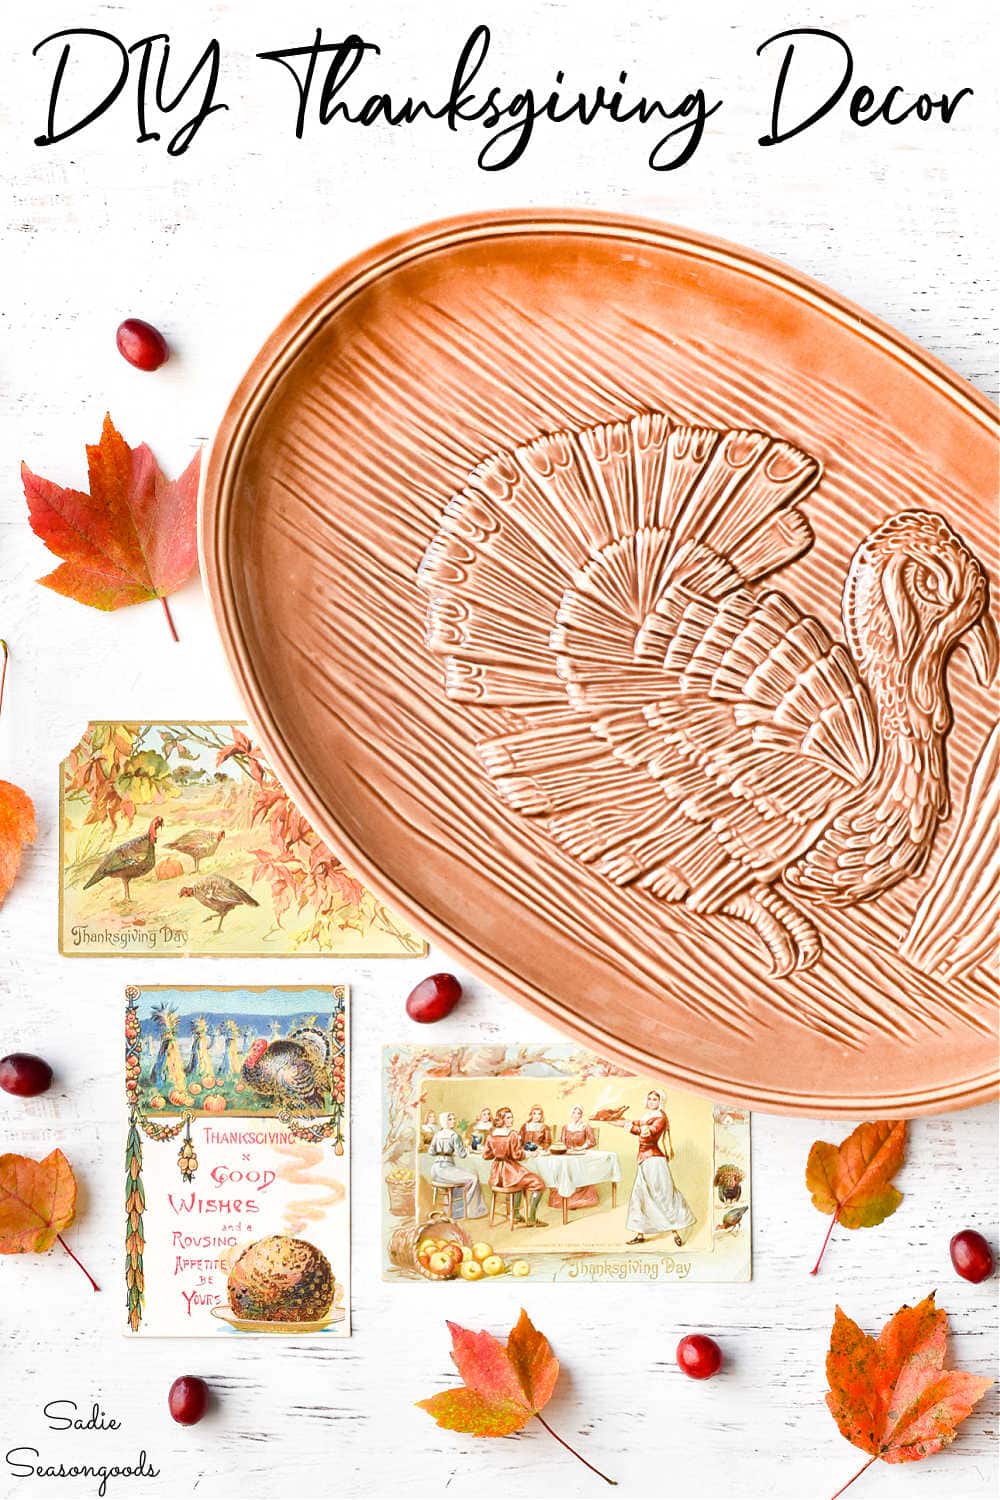 Let's Makeover Some Thanksgiving Pilgrims - Craftsy Soul